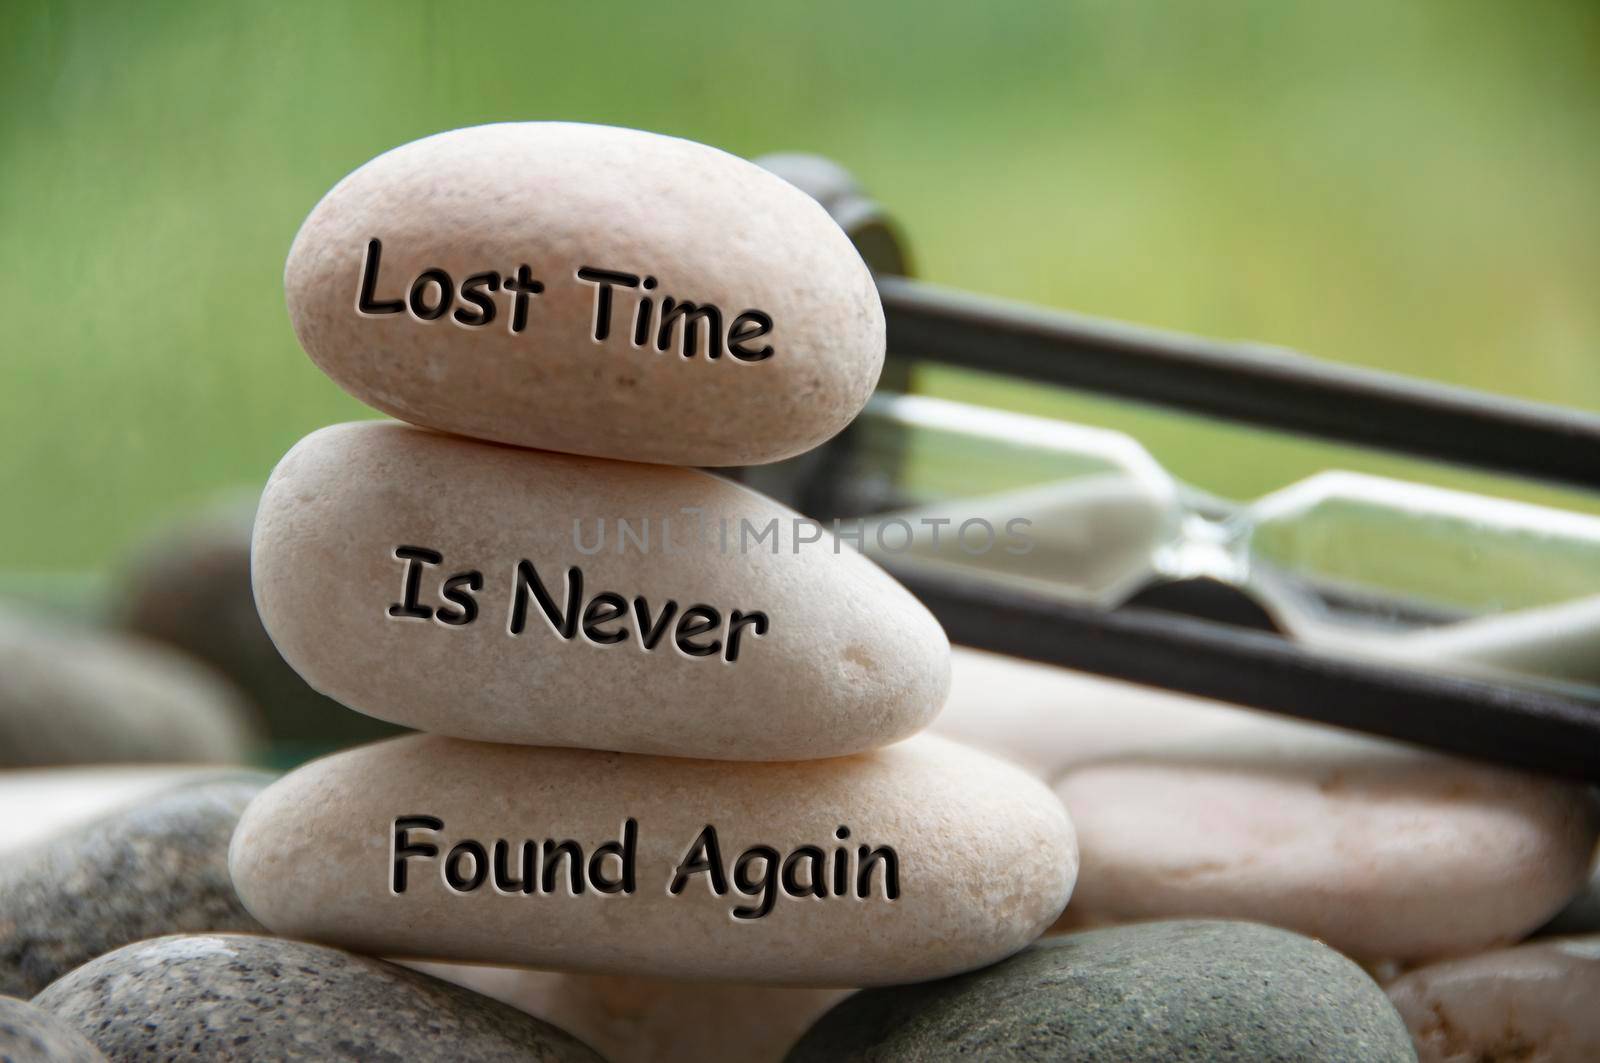 Lost time is never found again text engraved on stones with minute glass background. Copy space and time concept by yom98